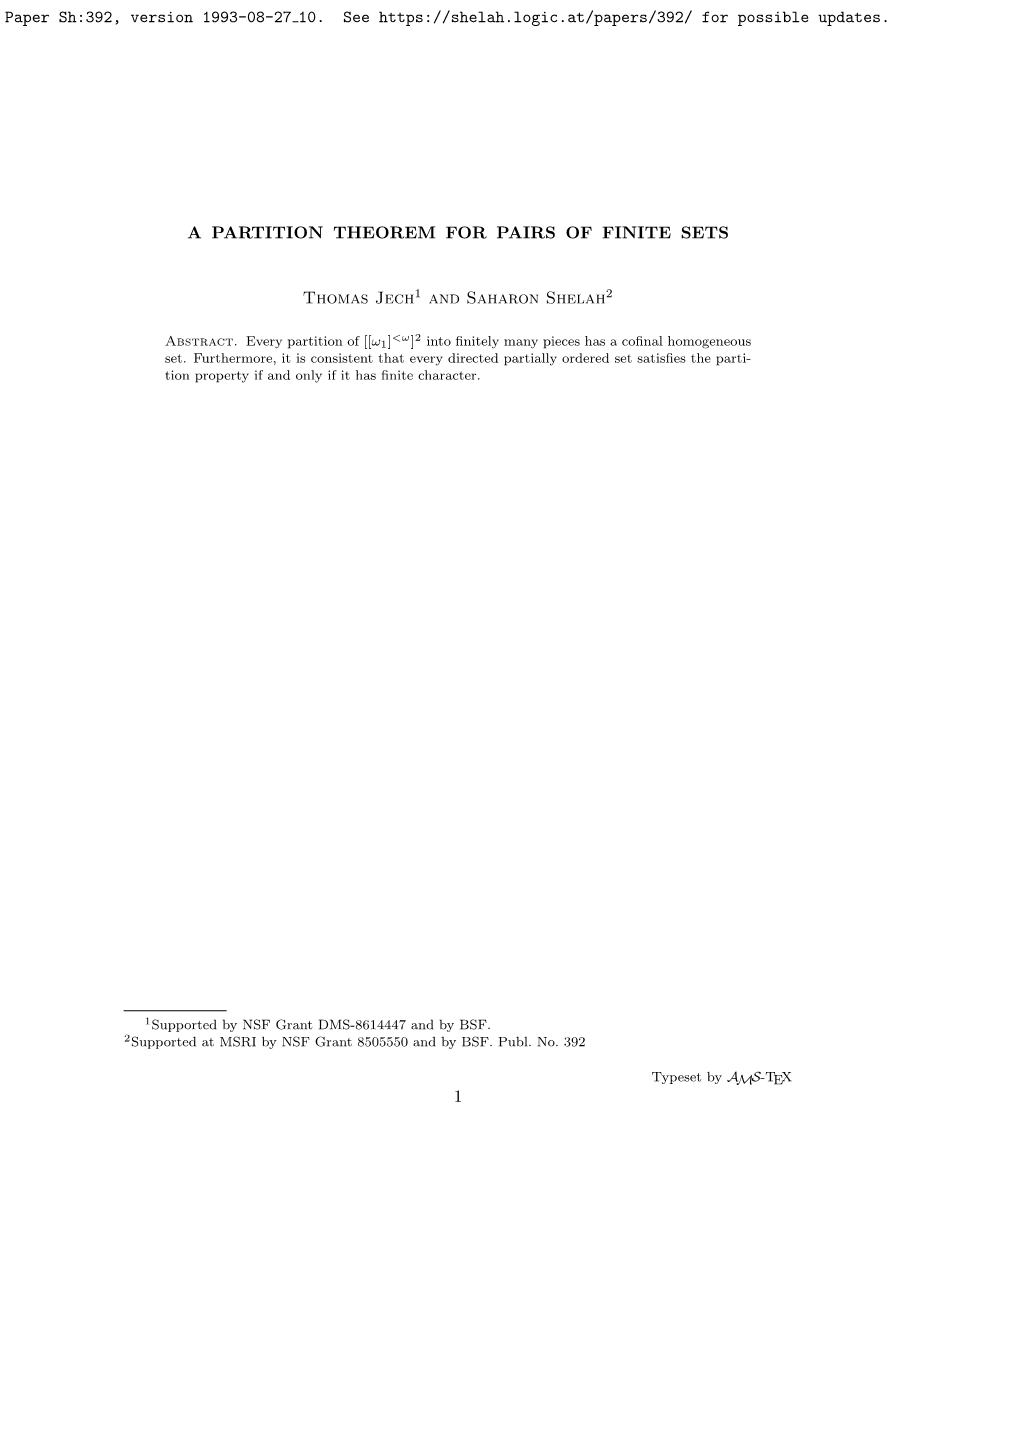 A PARTITION THEOREM for PAIRS of FINITE SETS Thomas Jech And